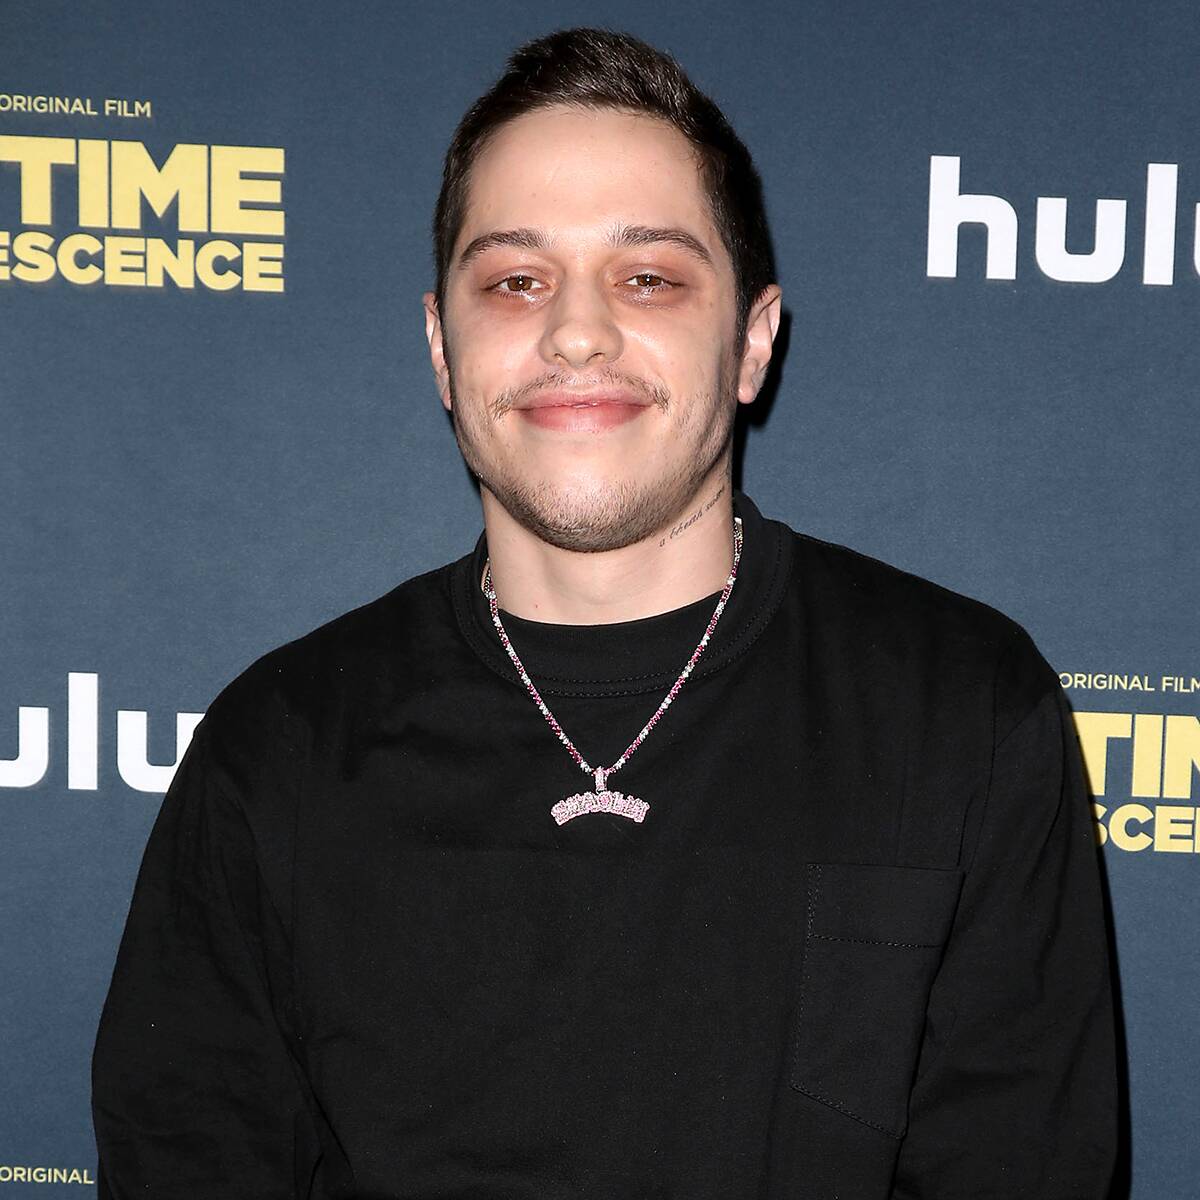 Watch Pete Davidson Make His Debut in NSFW The Suicide Squad Trailer